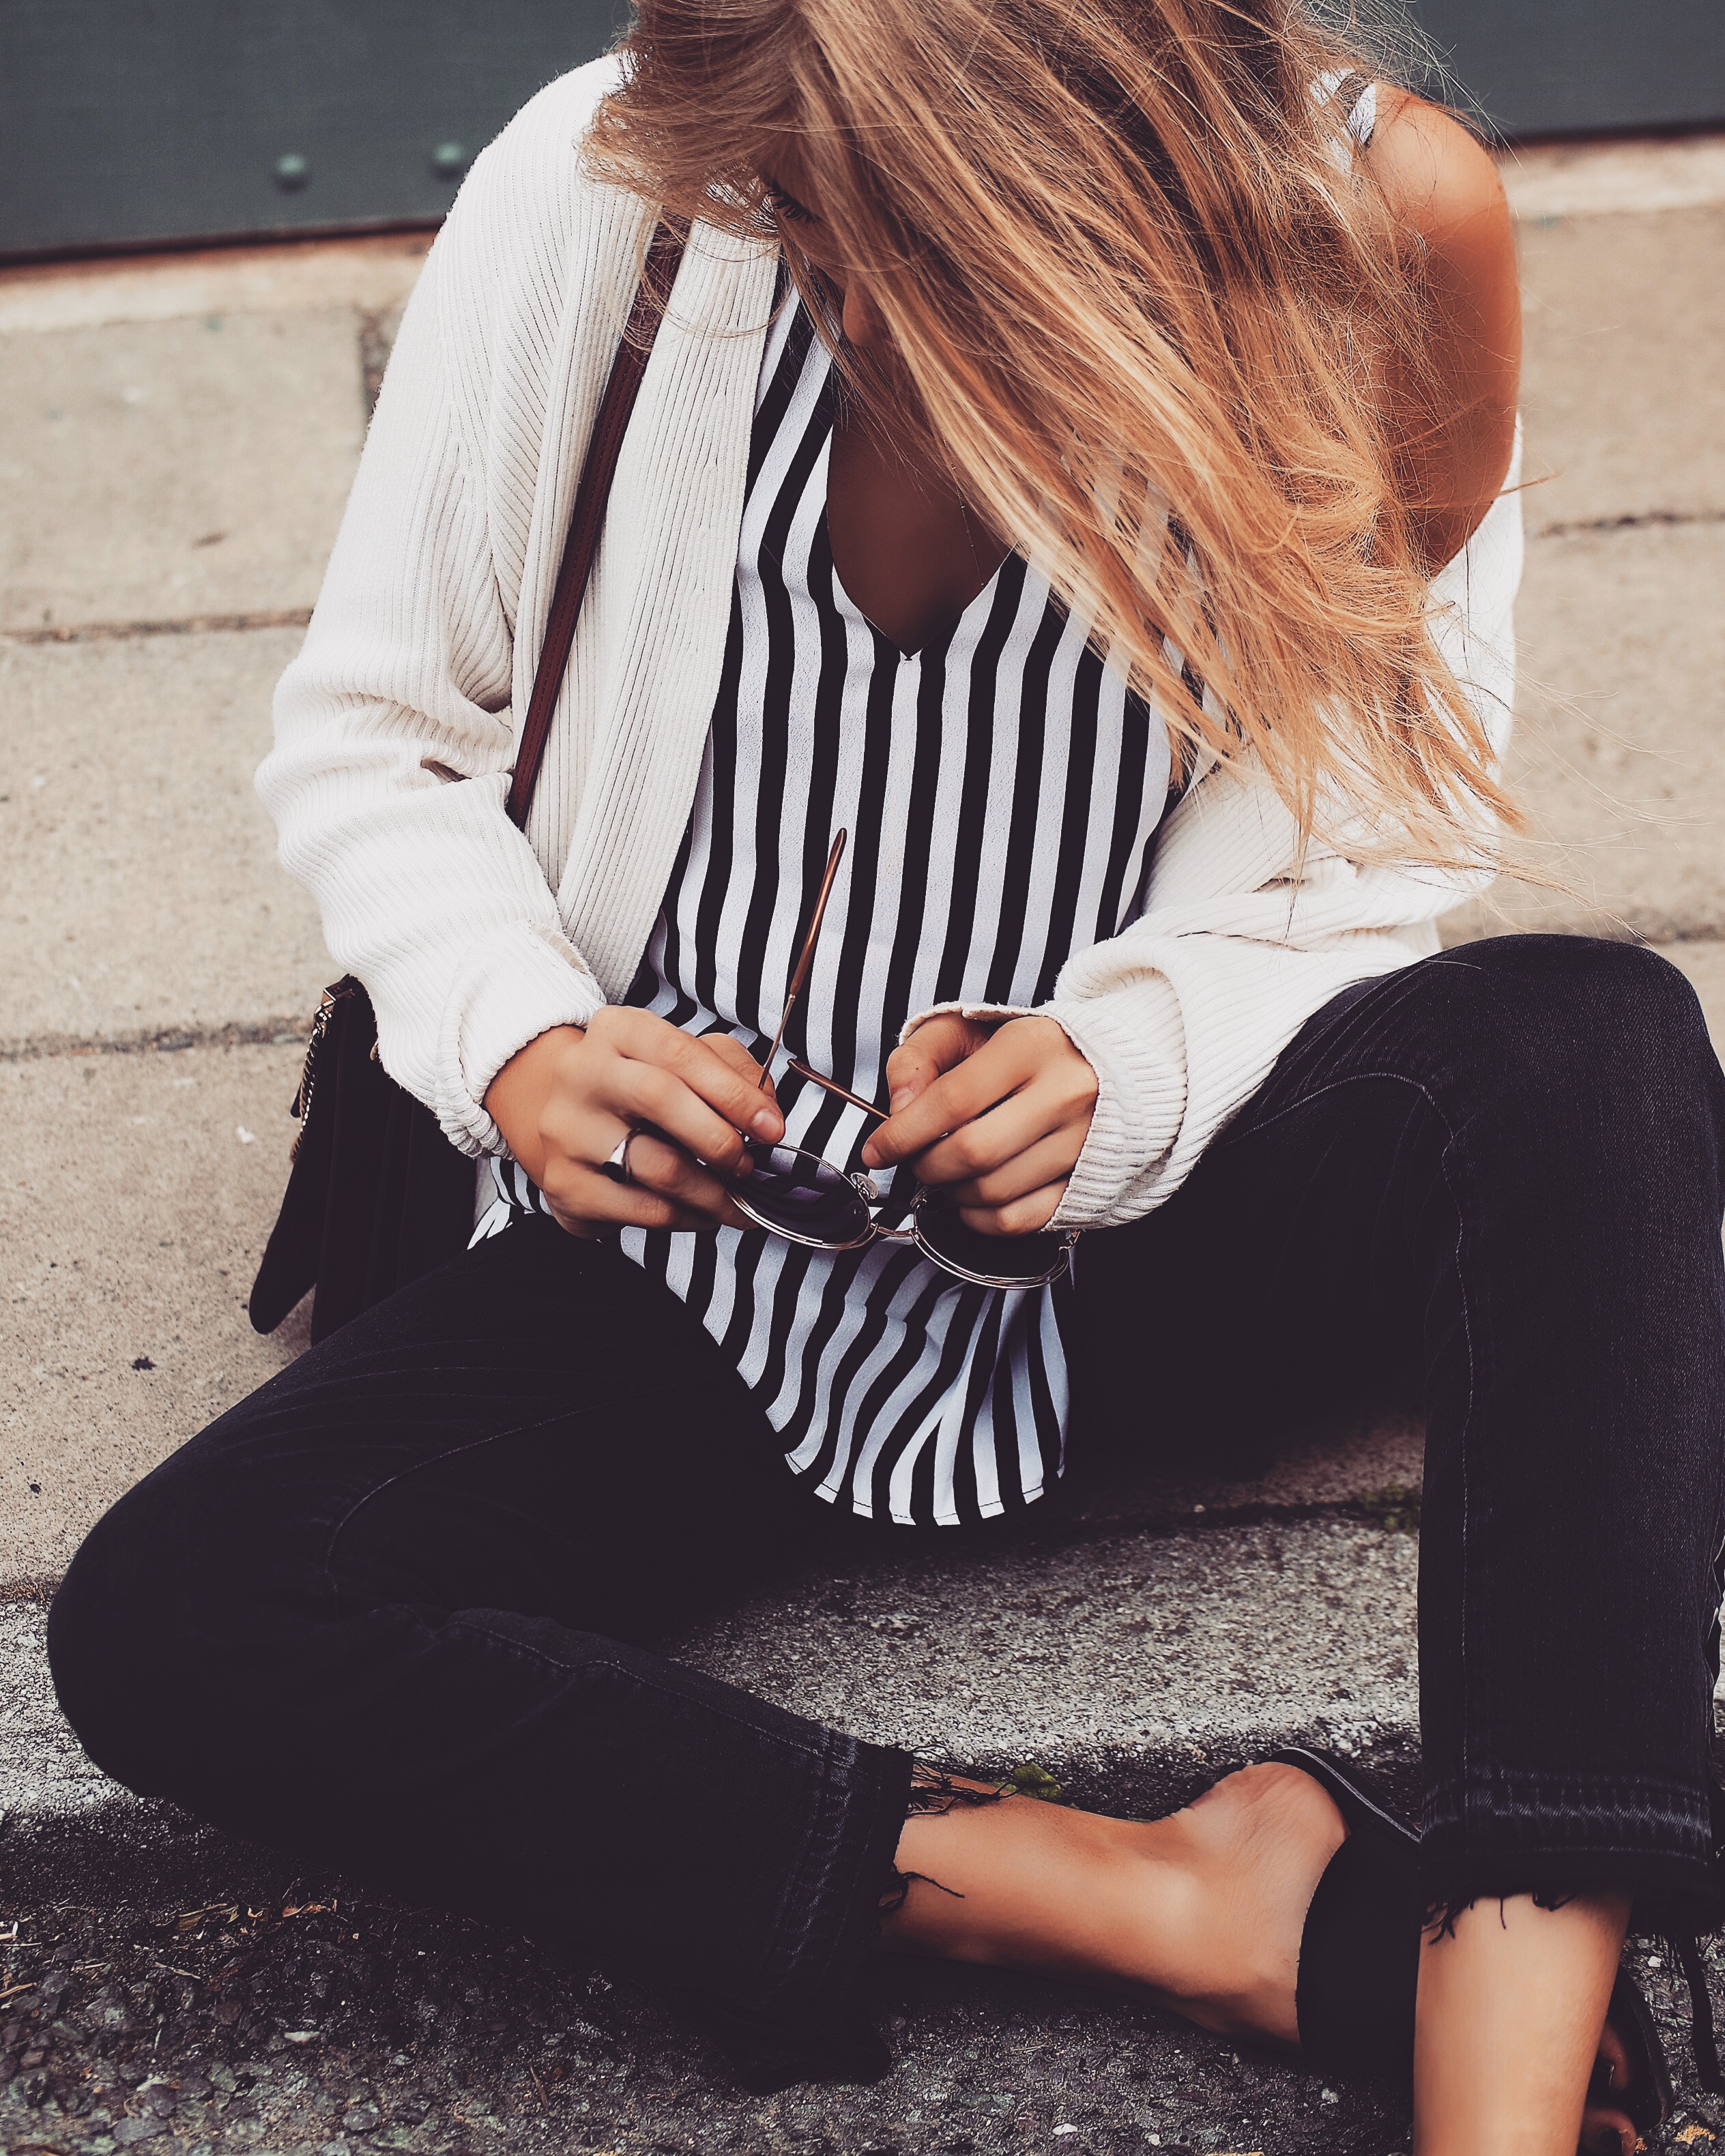 Monochrome Summer Outfit Ideas | 1 Top 2 Ways – Love Style Mindfulness ...